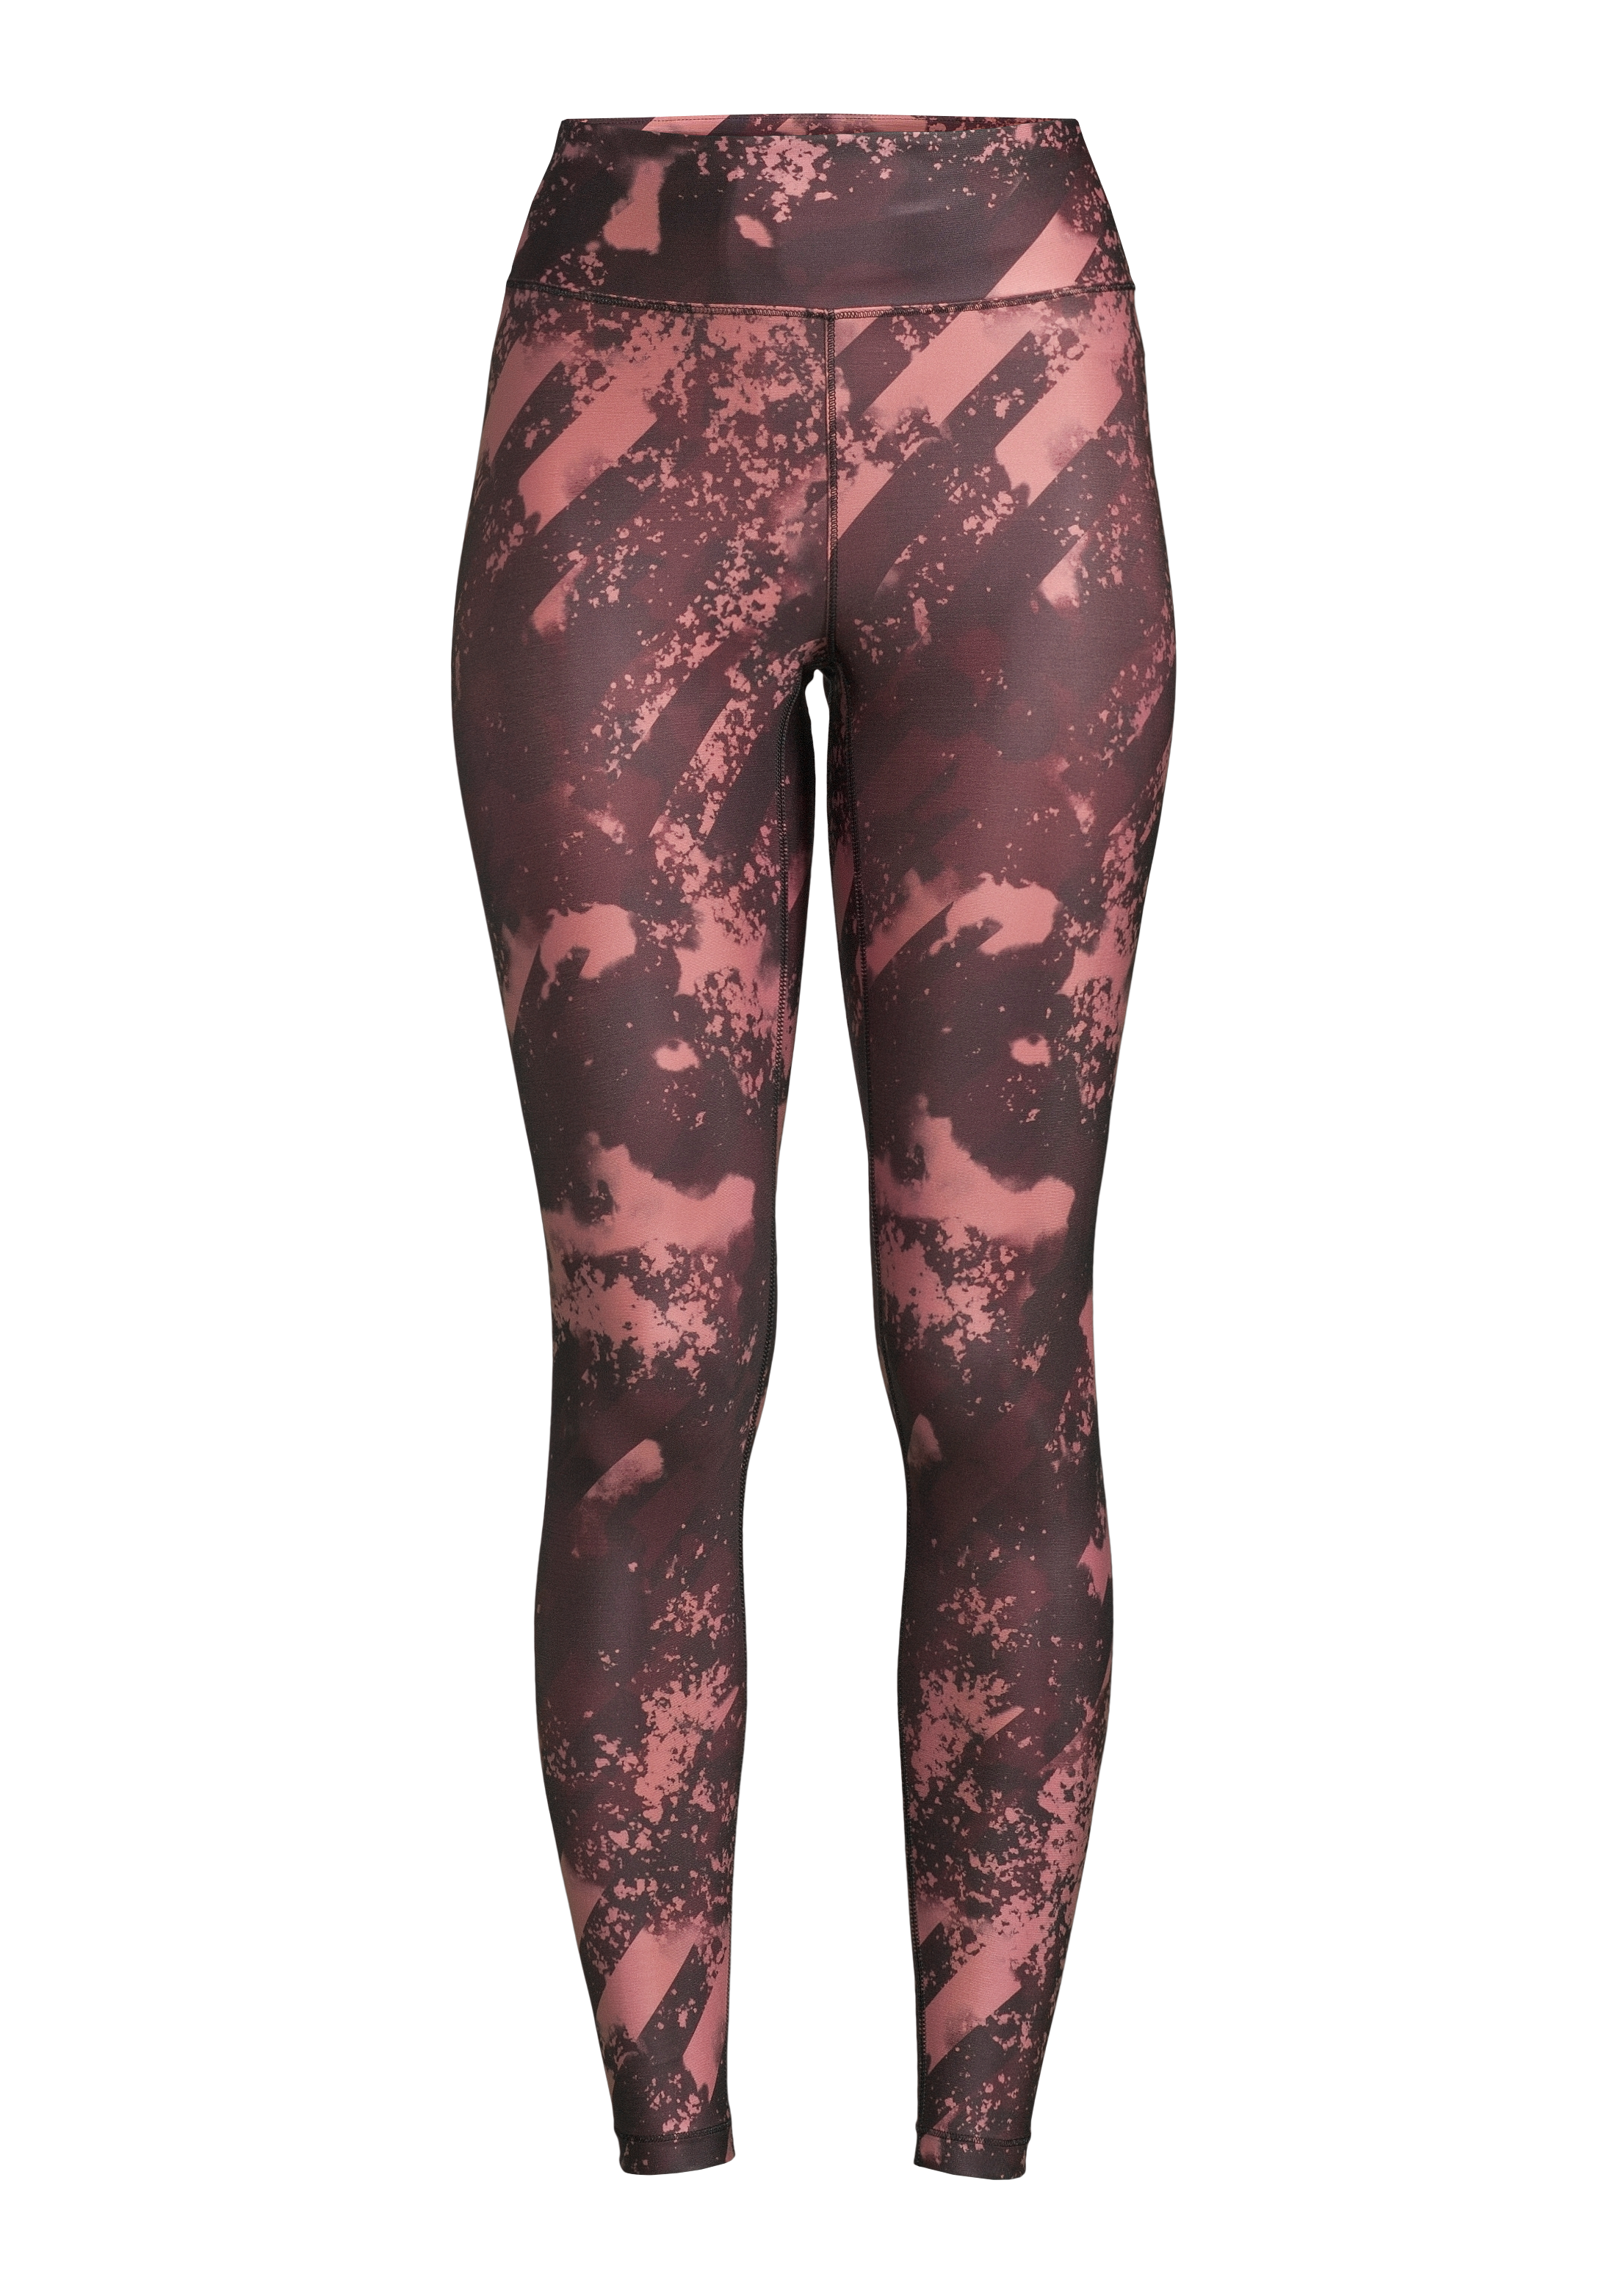 Printed Sport Tights Boost Red